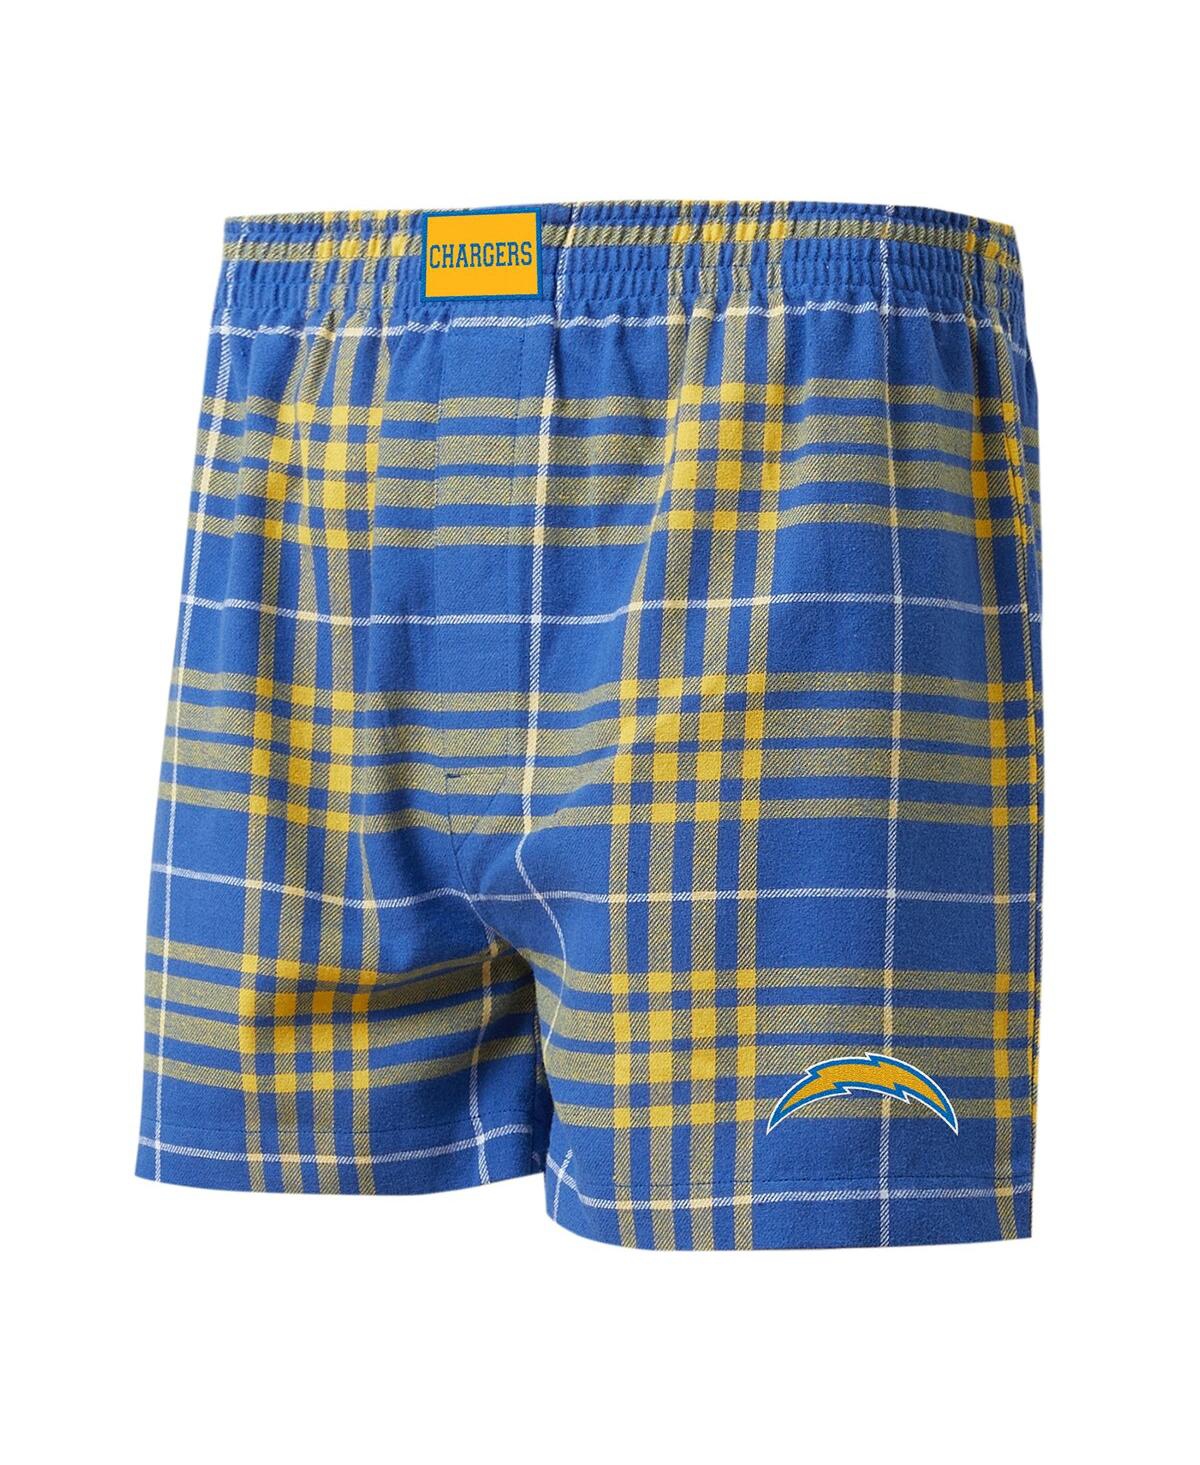 Men's Concepts Sport Powder Blue, Gold Los Angeles Chargers Concord Flannel Boxers - Powder Blue, Gold